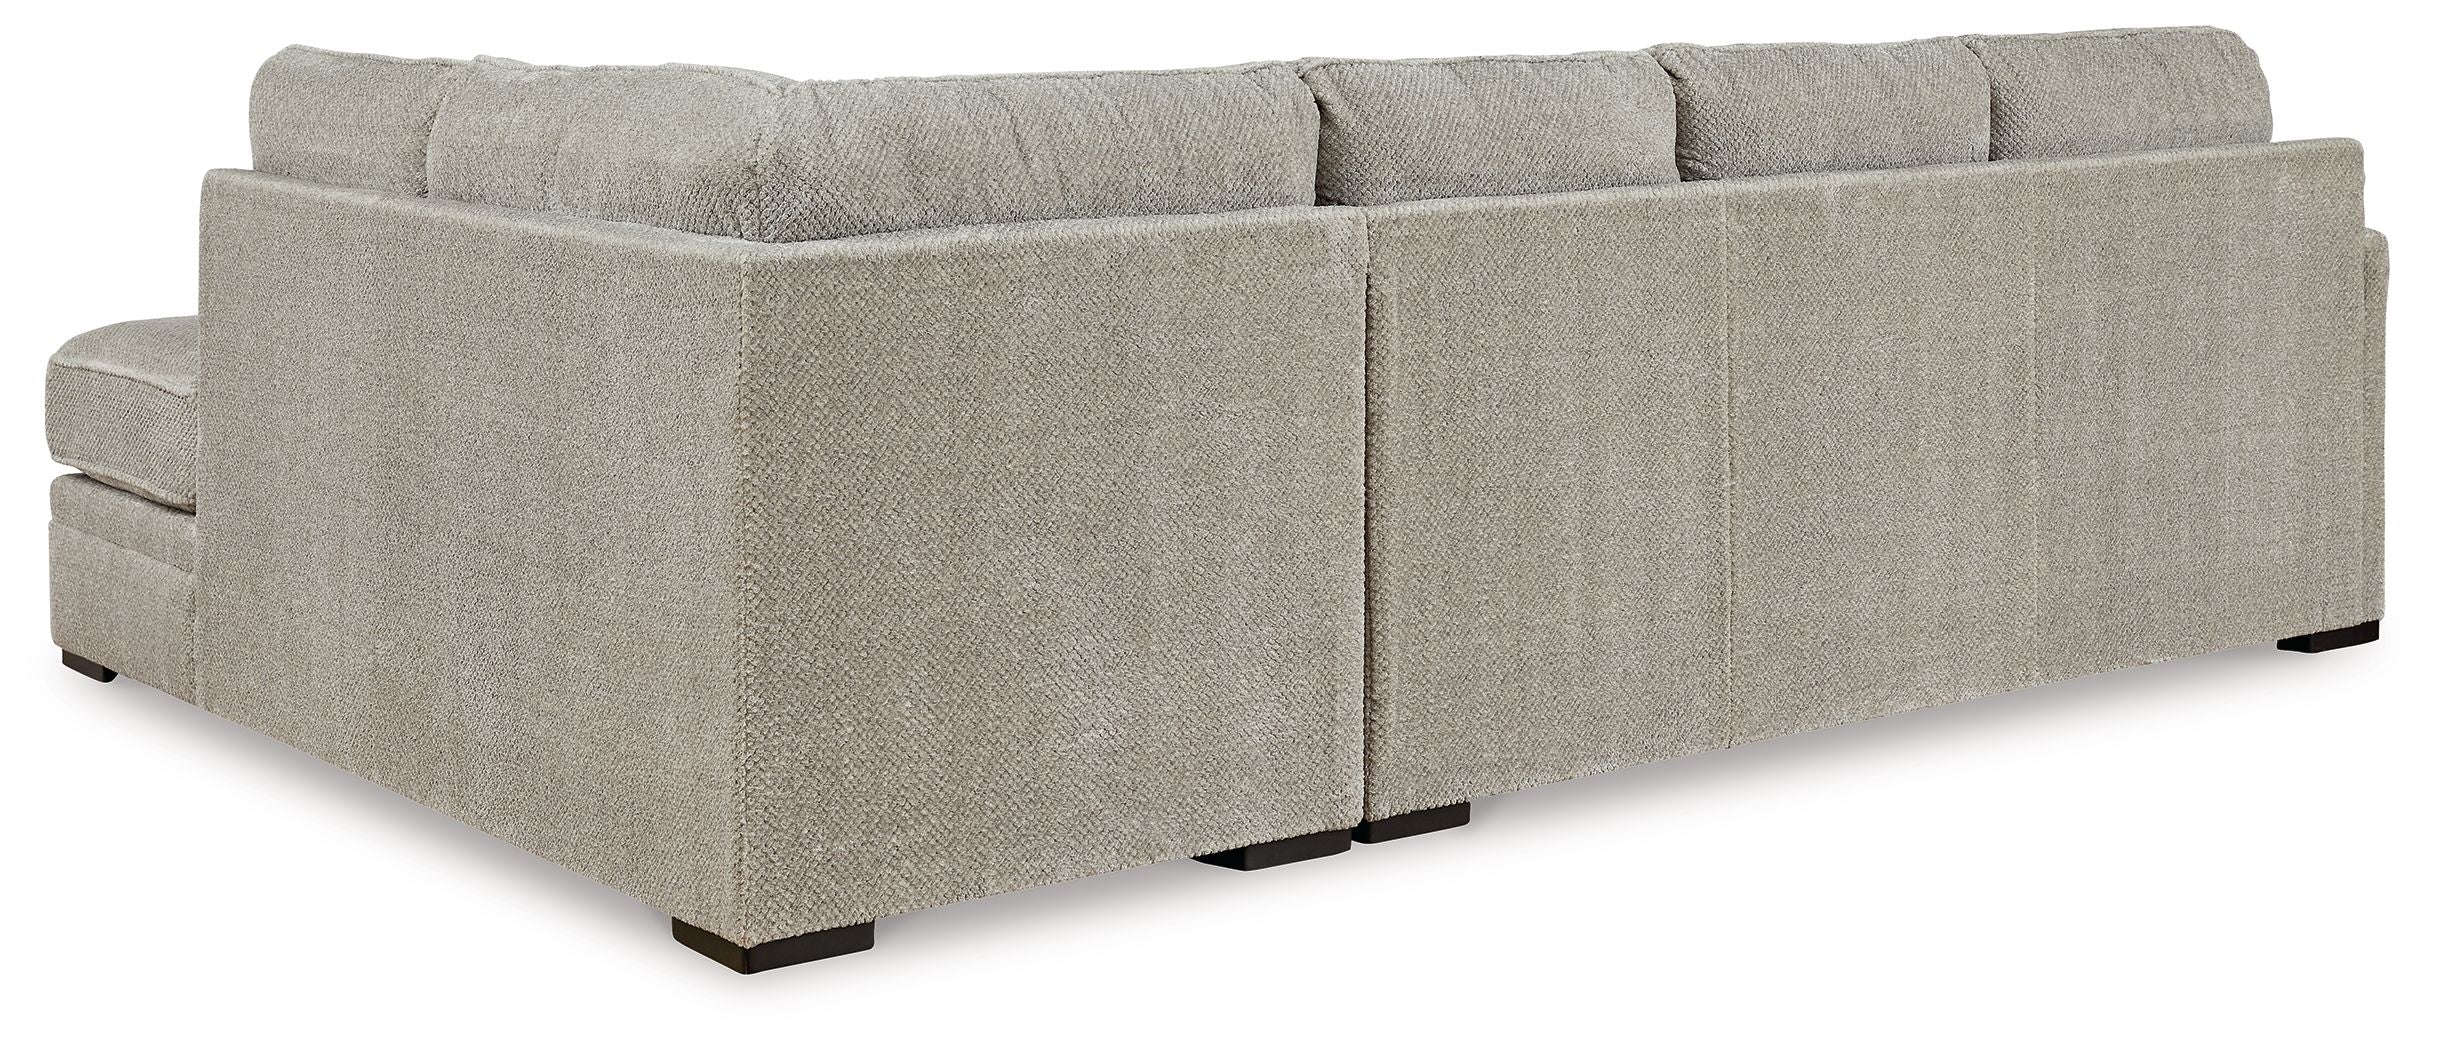 Benchcraft Calnita U Shaped Sectional-Stationary Sectionals-American Furniture Outlet